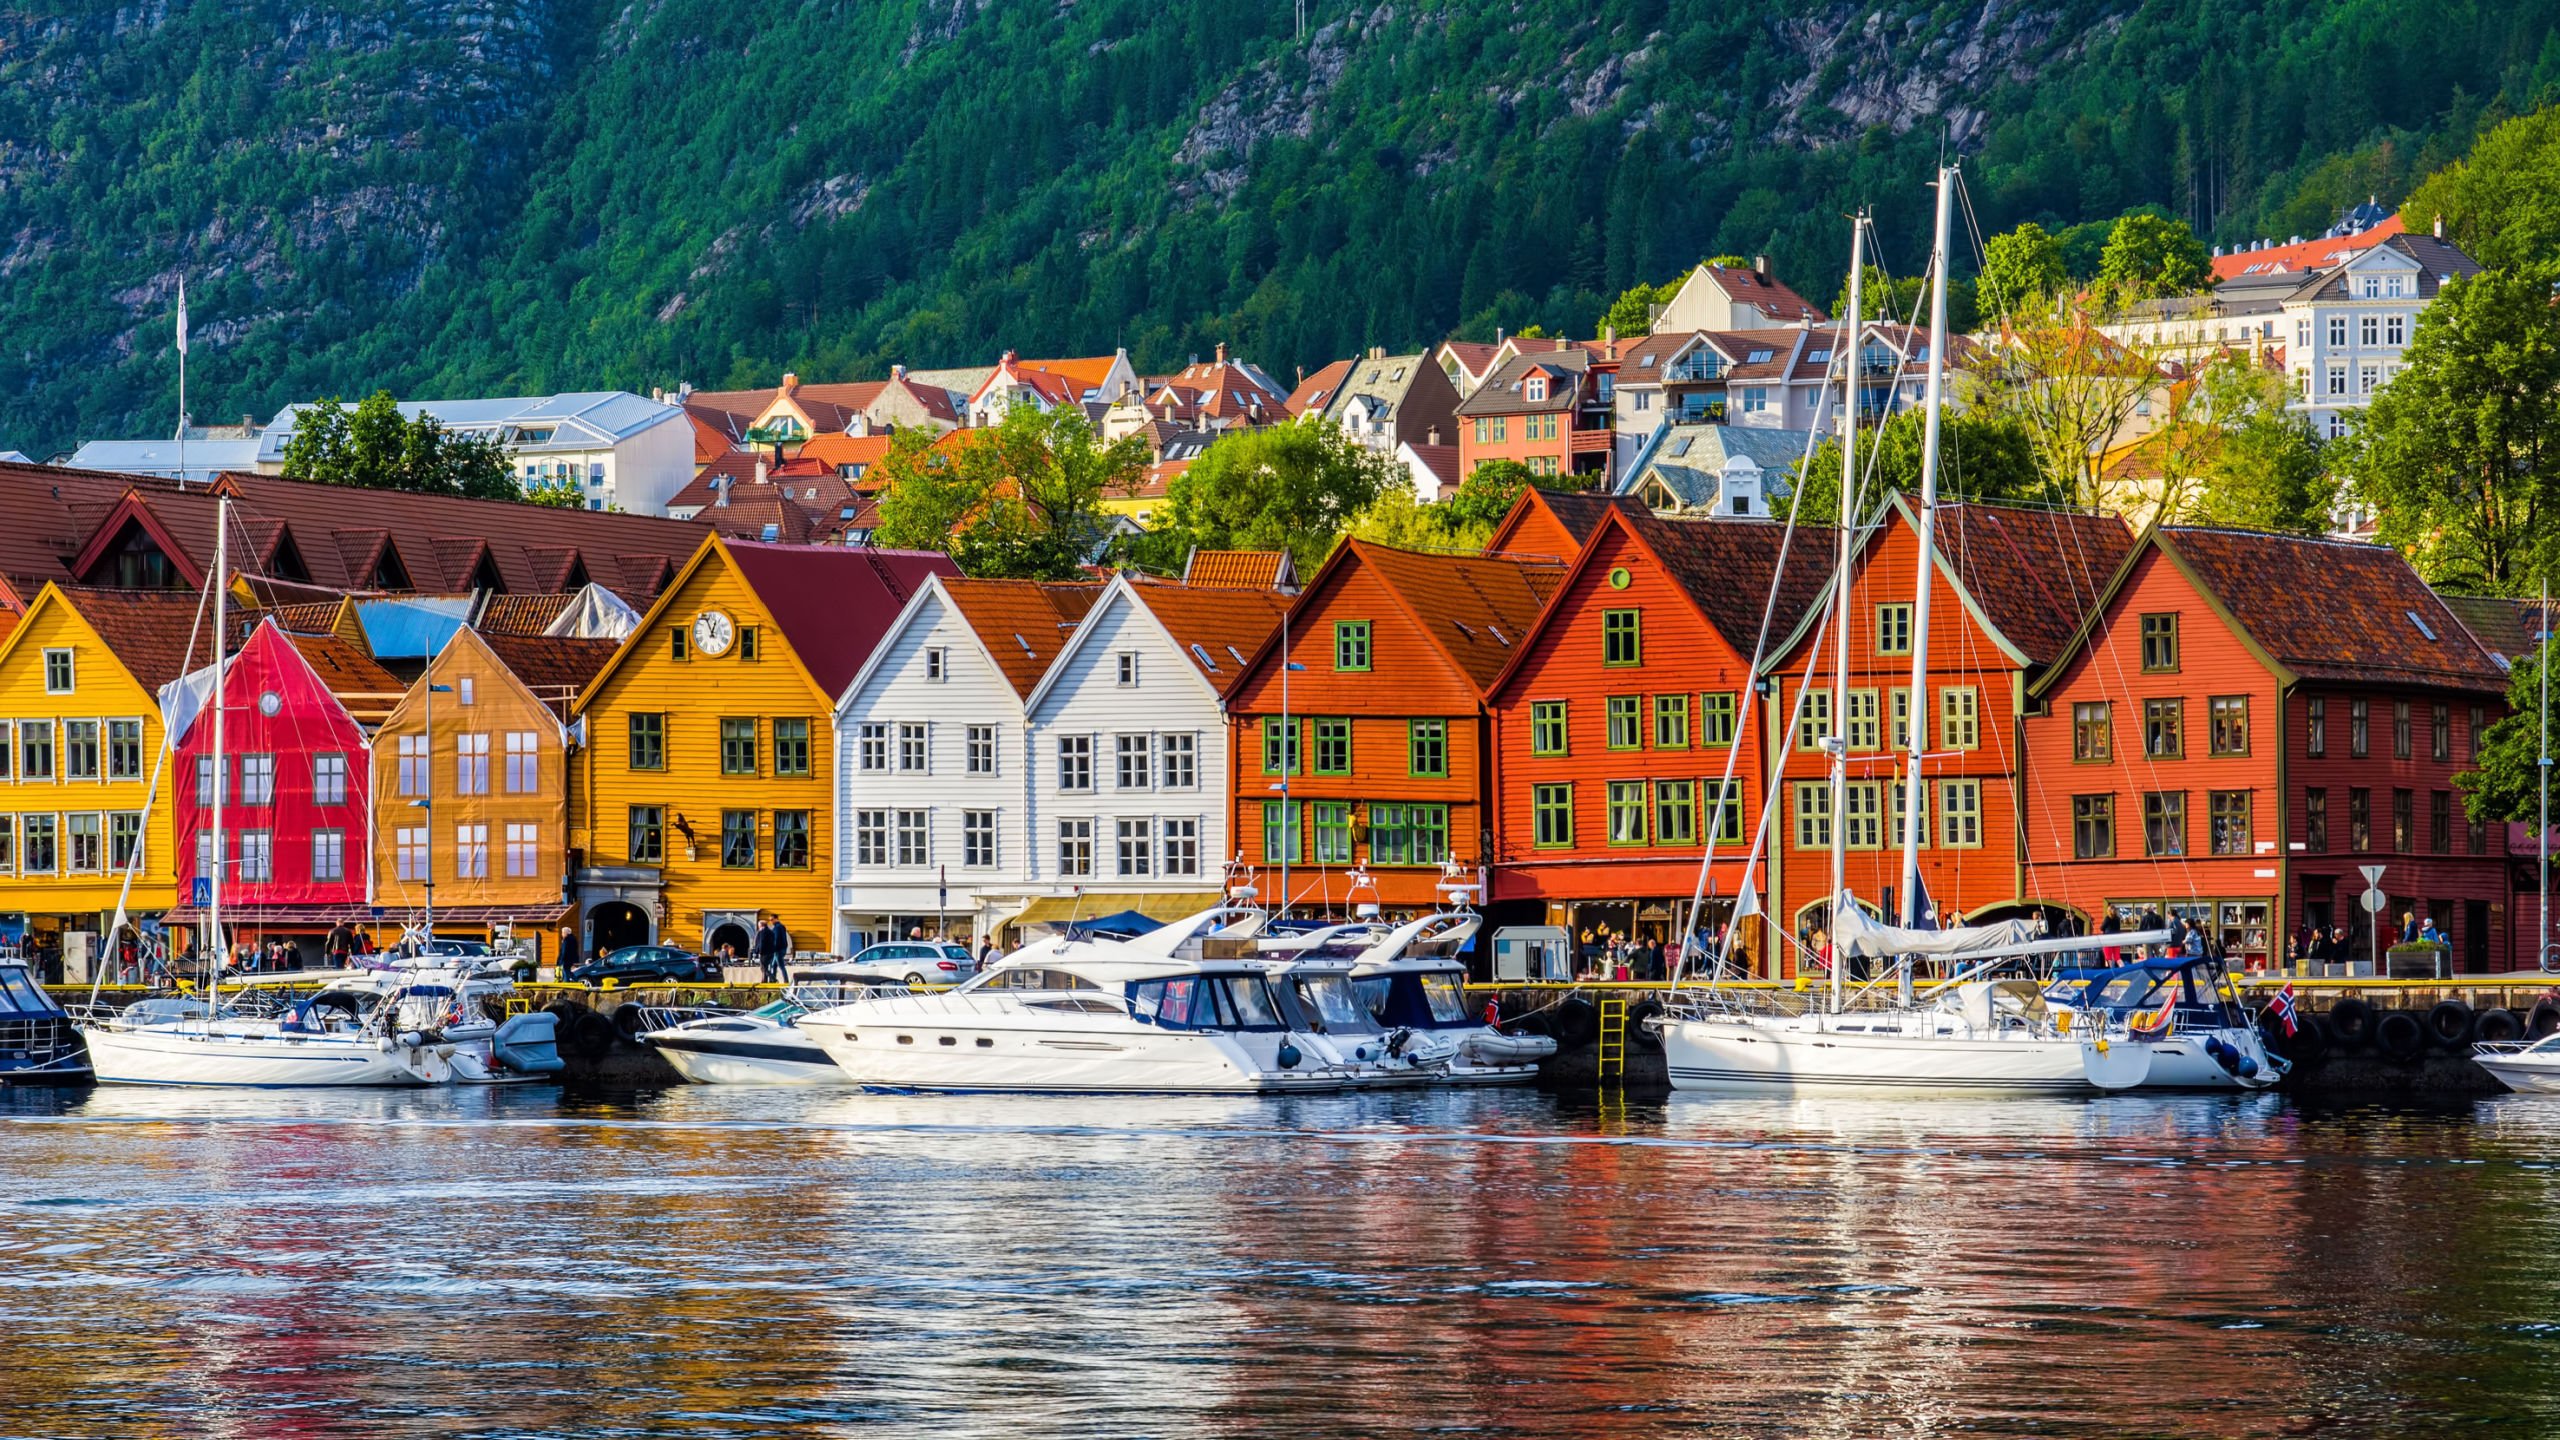 The iconic wharf buildings of Bryggen in Bergen, Norway.